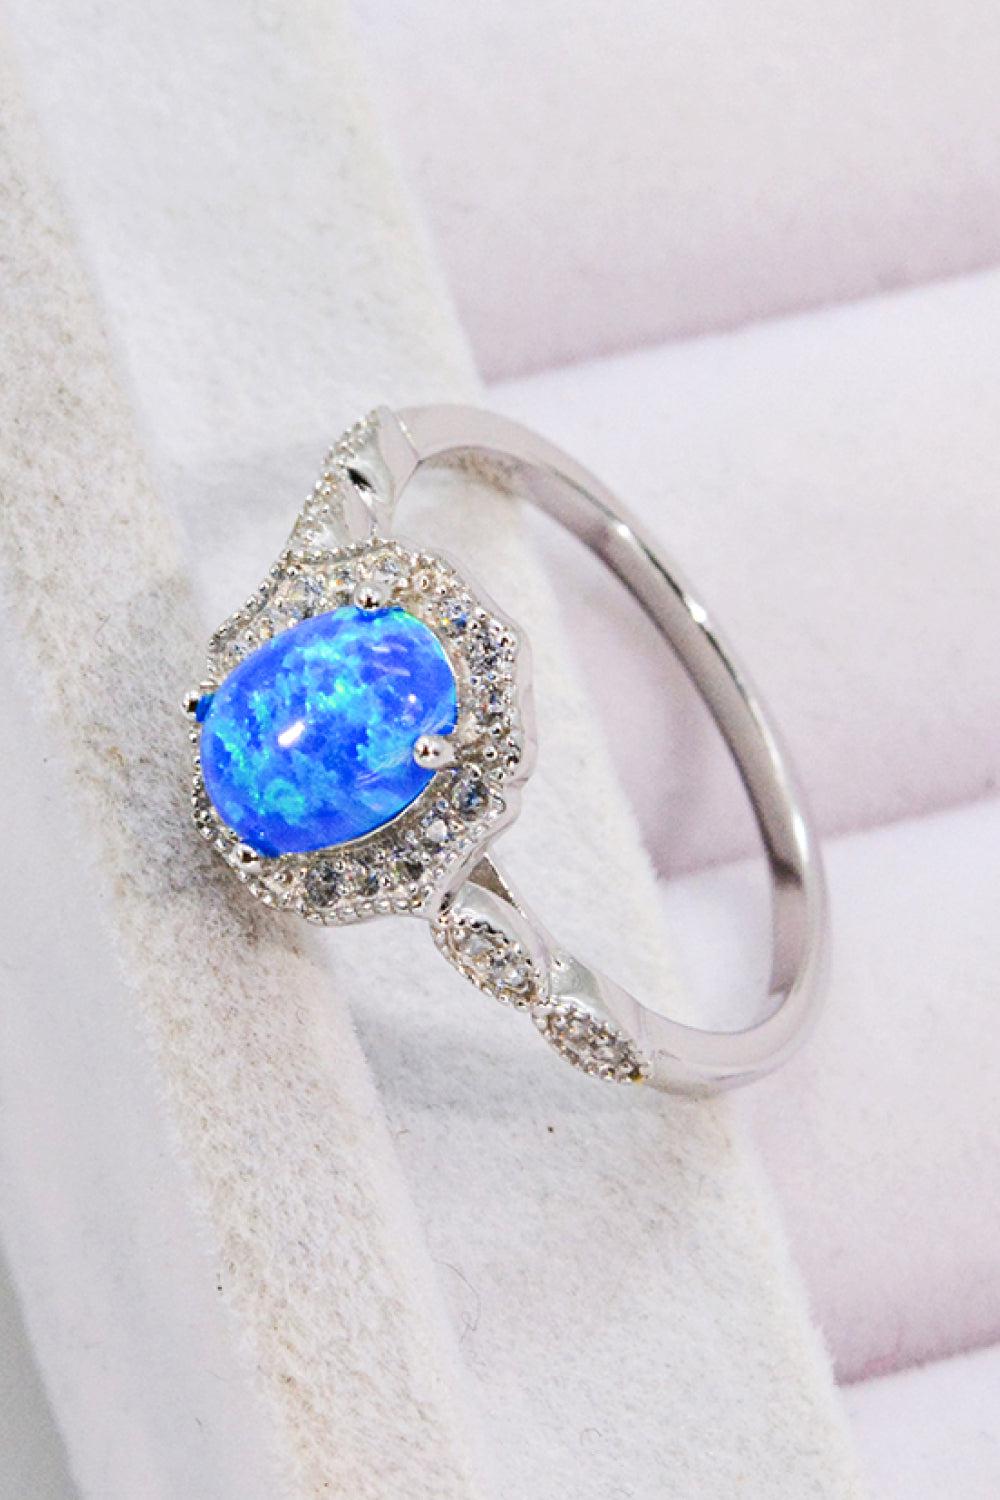 Opal and Zircon 925 Sterling Silver Ring BLUE ZONE PLANET